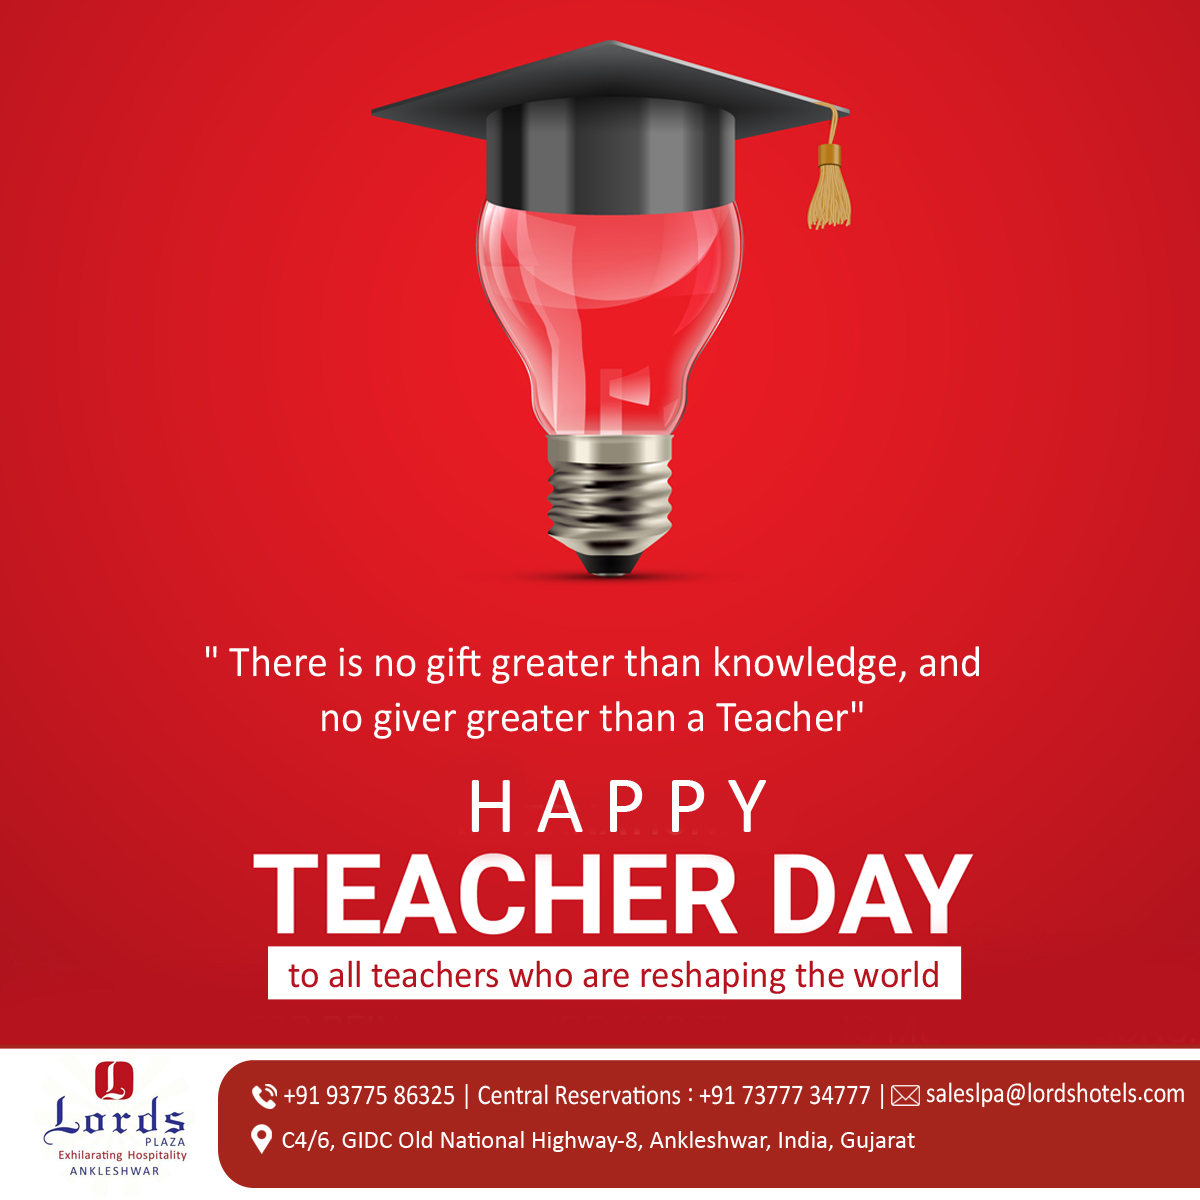 ' There is no gift greater than knowledge, and no giver greater than a Teacher'
Happy teacher's day to all teachers who are reshaping the world

#teachers #teachersday #teachersofinsta #teachersoffacebook #happyteachersday❤️